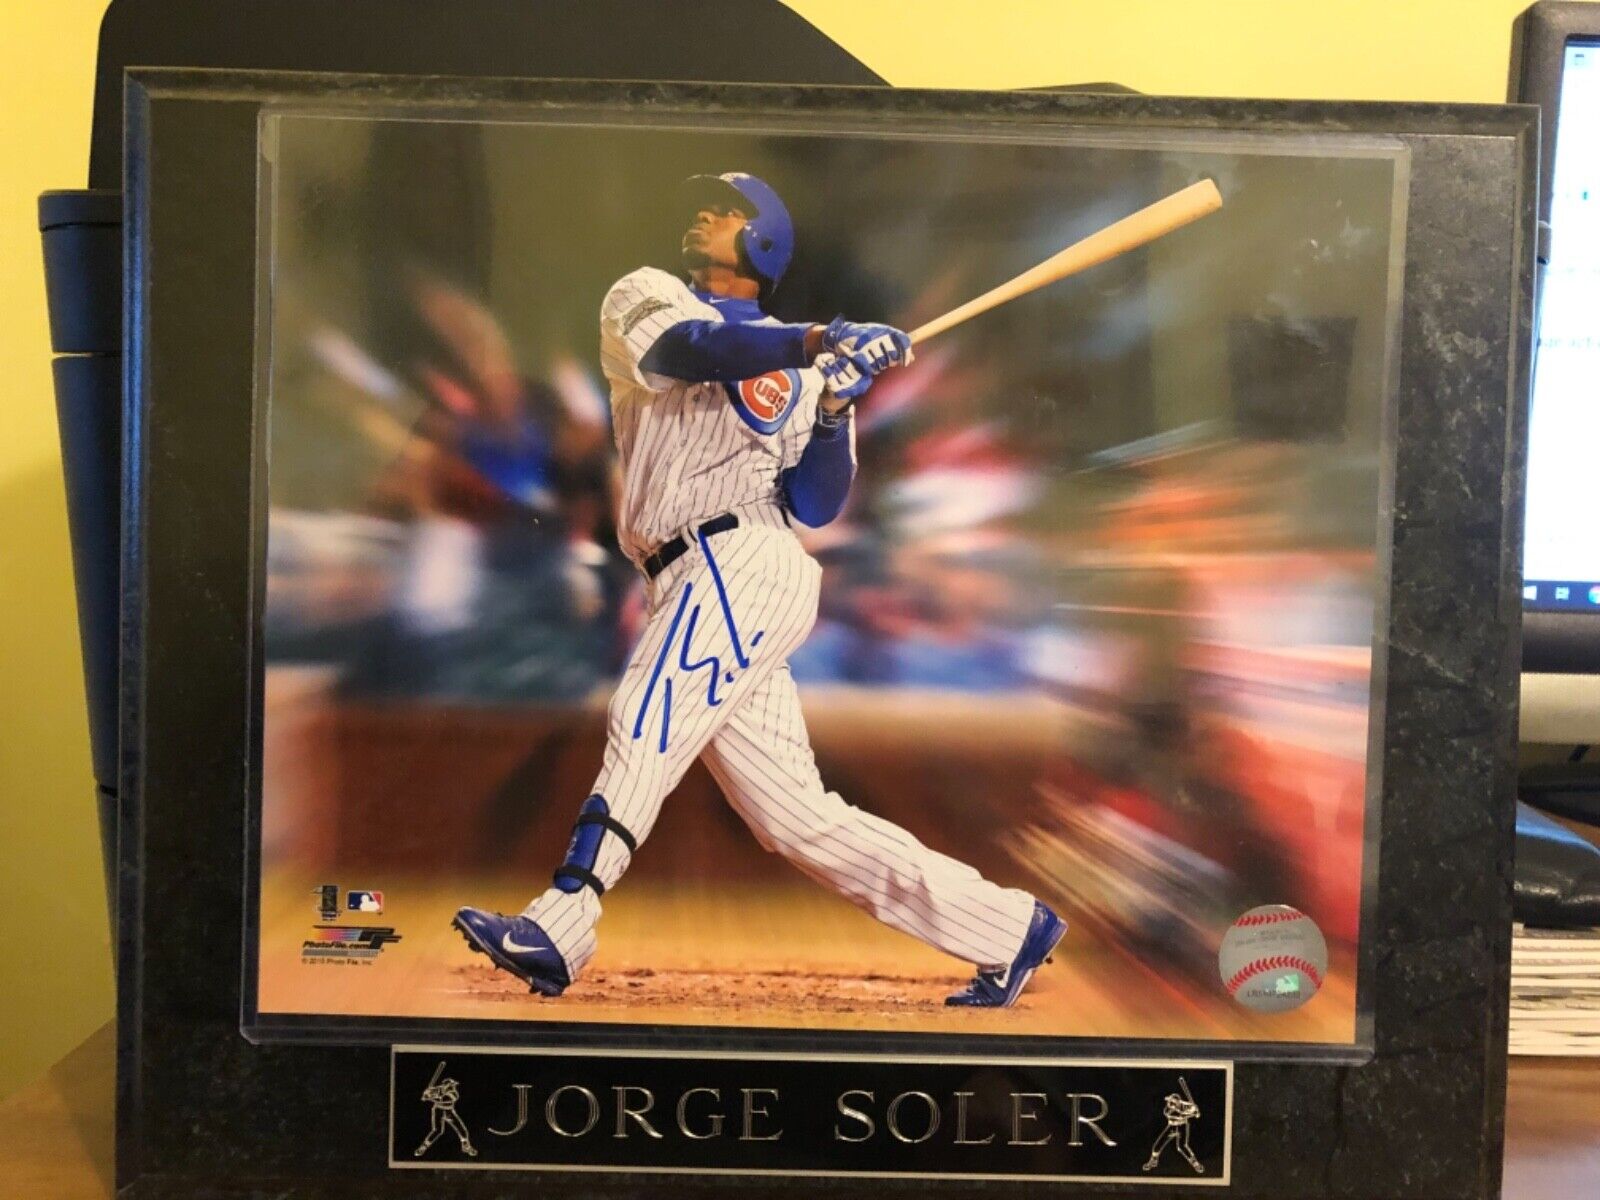 JORGE SOLER AUTOGRAPH AUTHENTICATED BY CHICAGO CUBS